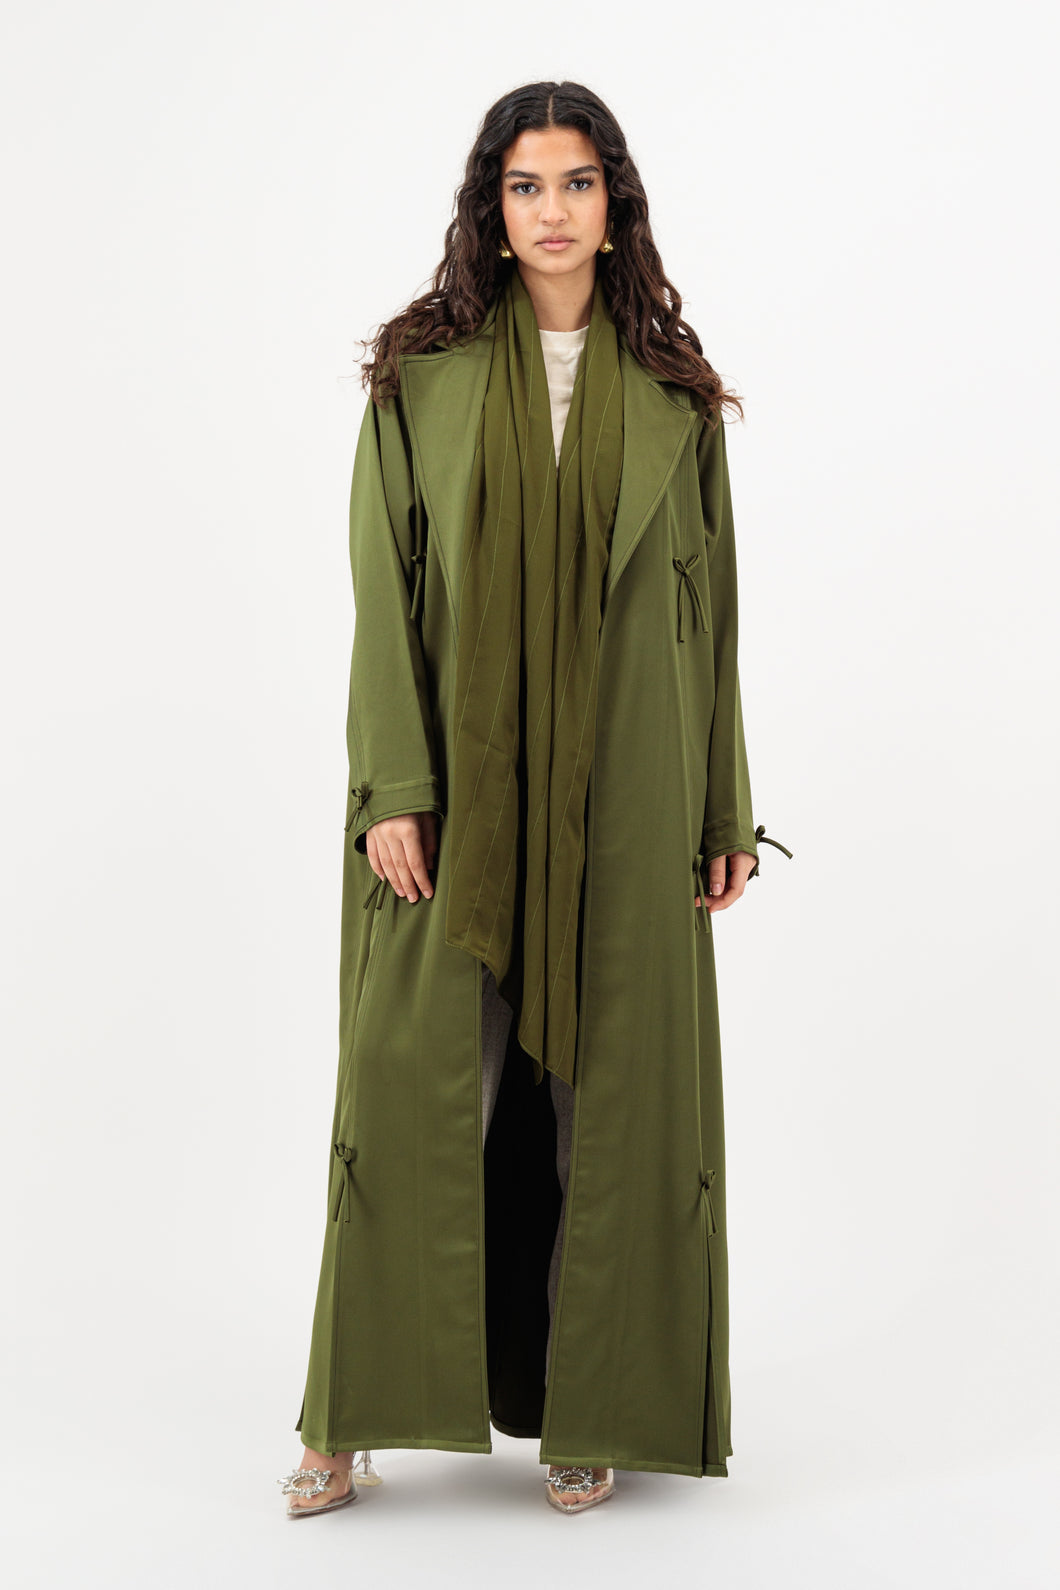 Jawhar in Olive